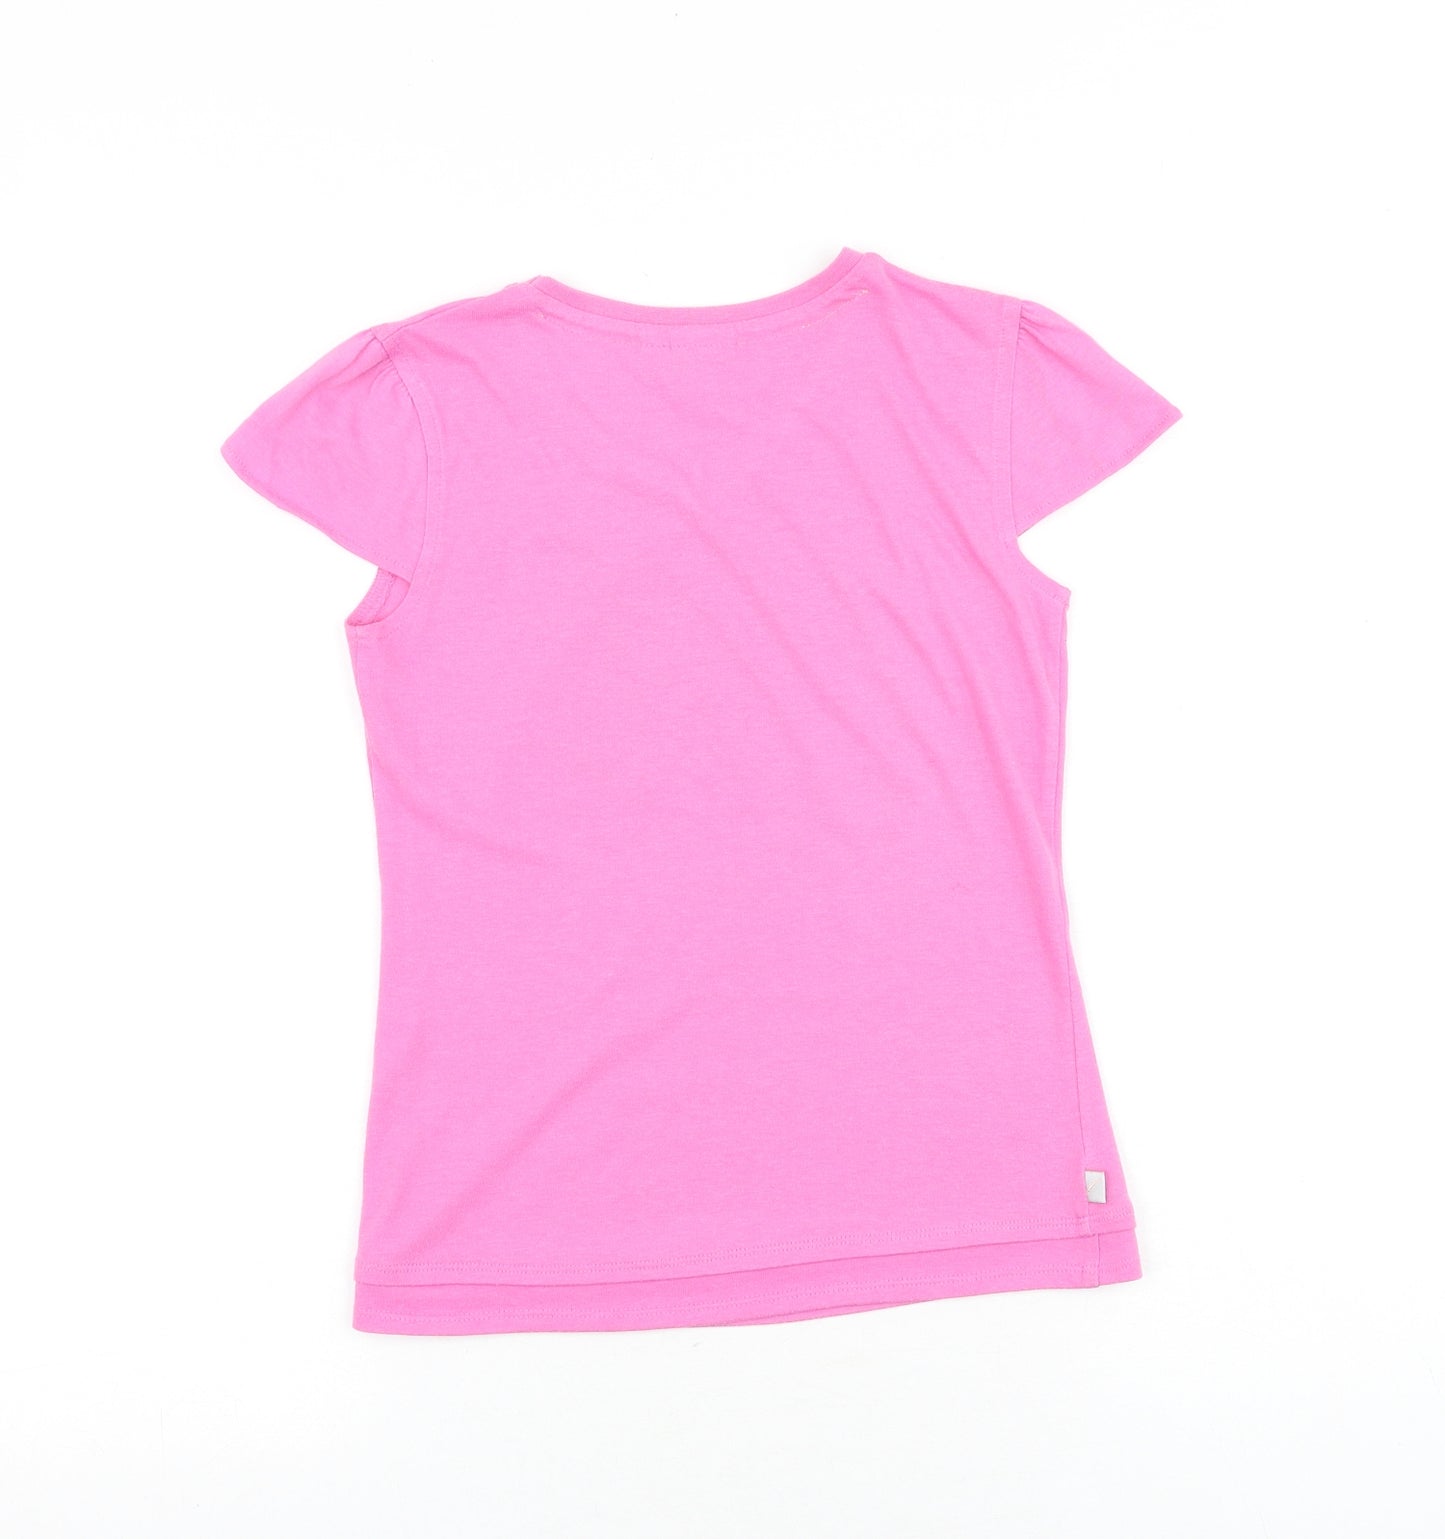 LA Gear Girls Pink Polyester Basic T-Shirt Size 11-12 Years V-Neck Pullover